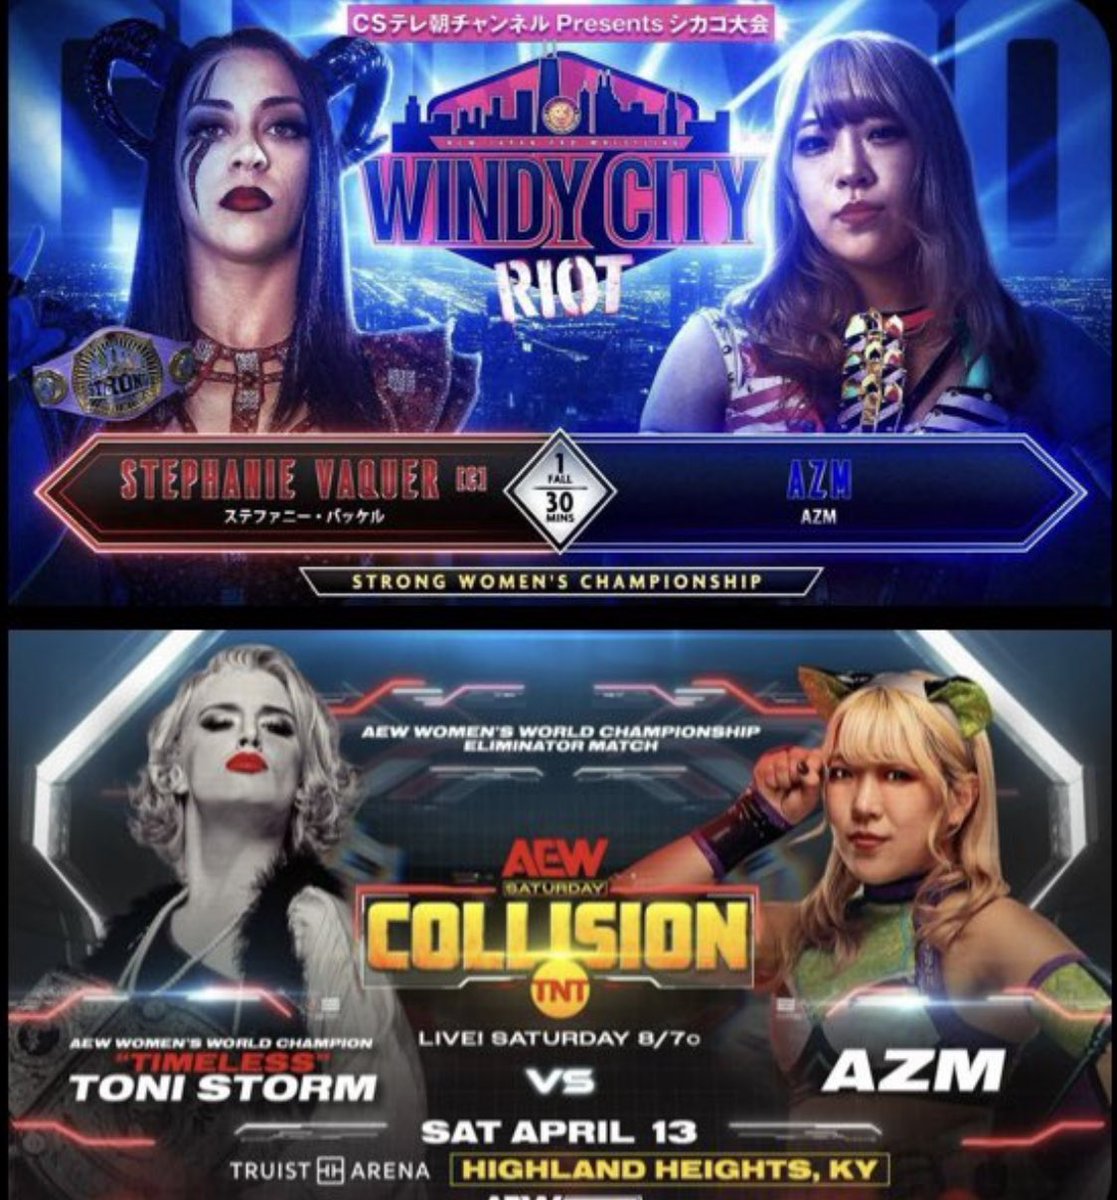 Two exciting days begin I feel like I get nervous every year in April🌸 Believe in yourself #njpwSTRONG #AEWCollision #STADOM